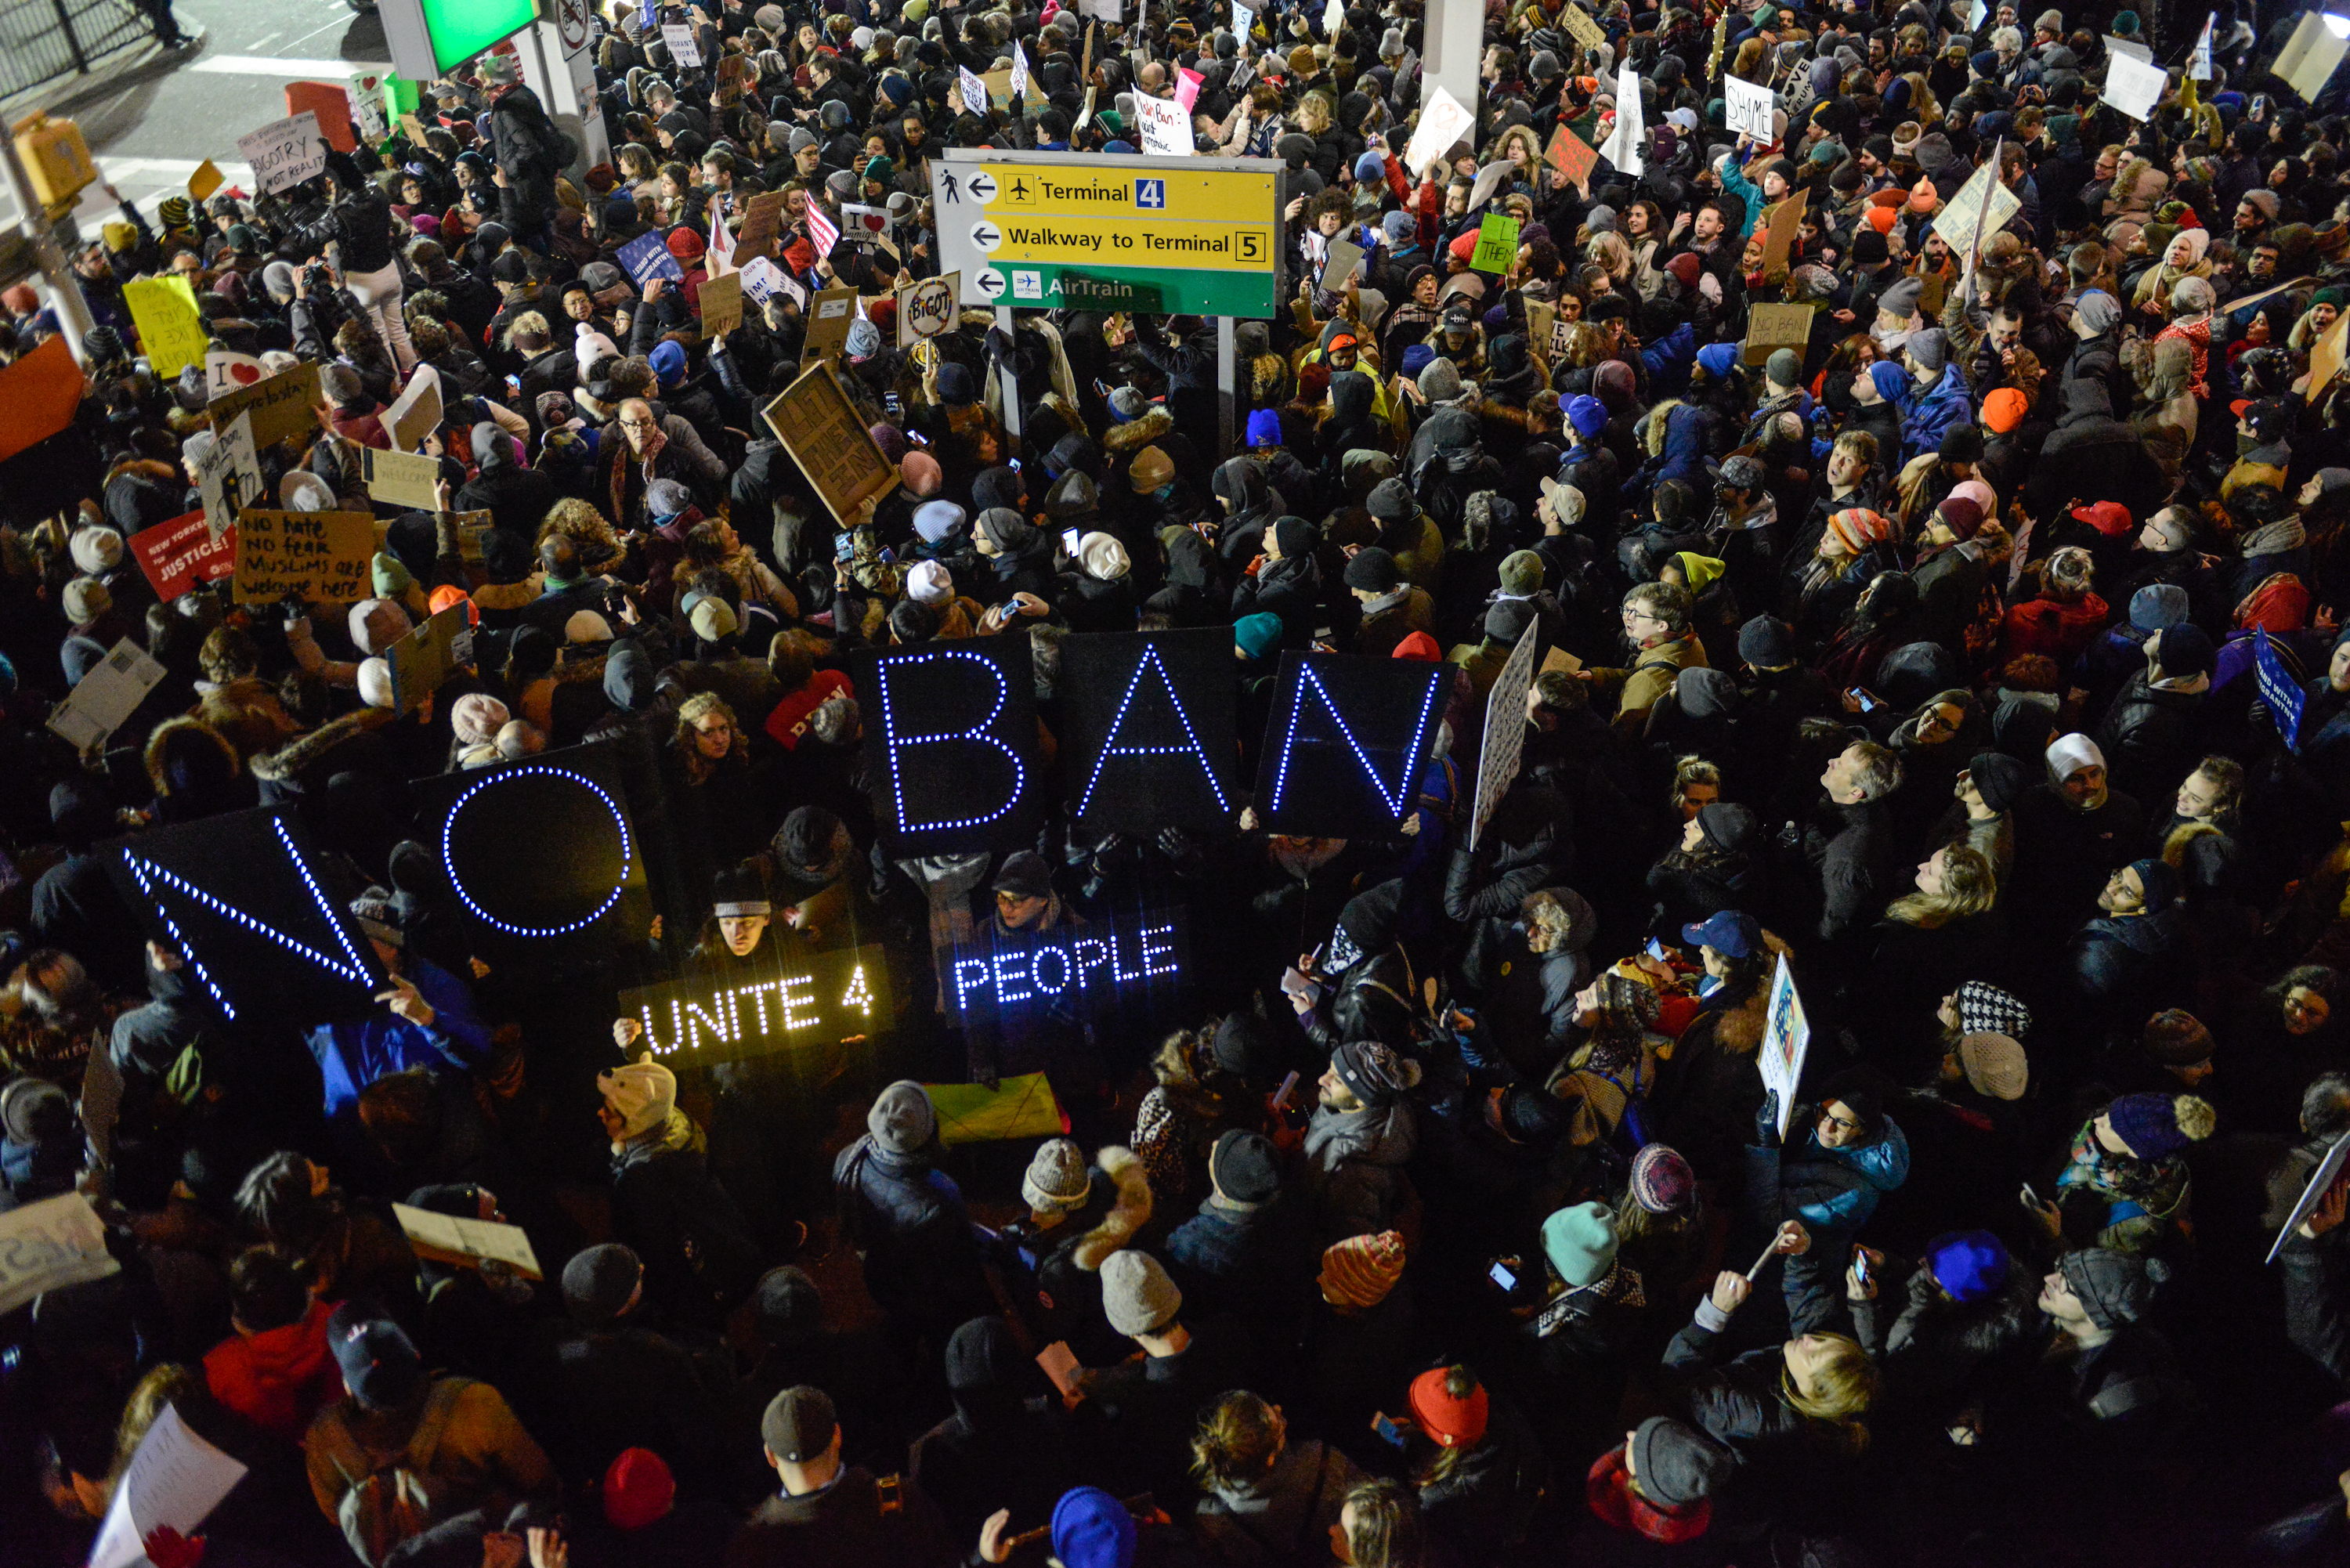 Protestors rally during a demonstration against the so-called "Muslim" ban at John F. Kennedy International Airport on Jan. 28, 2017 in New York City. (Stephanie Keith—Getty Images)